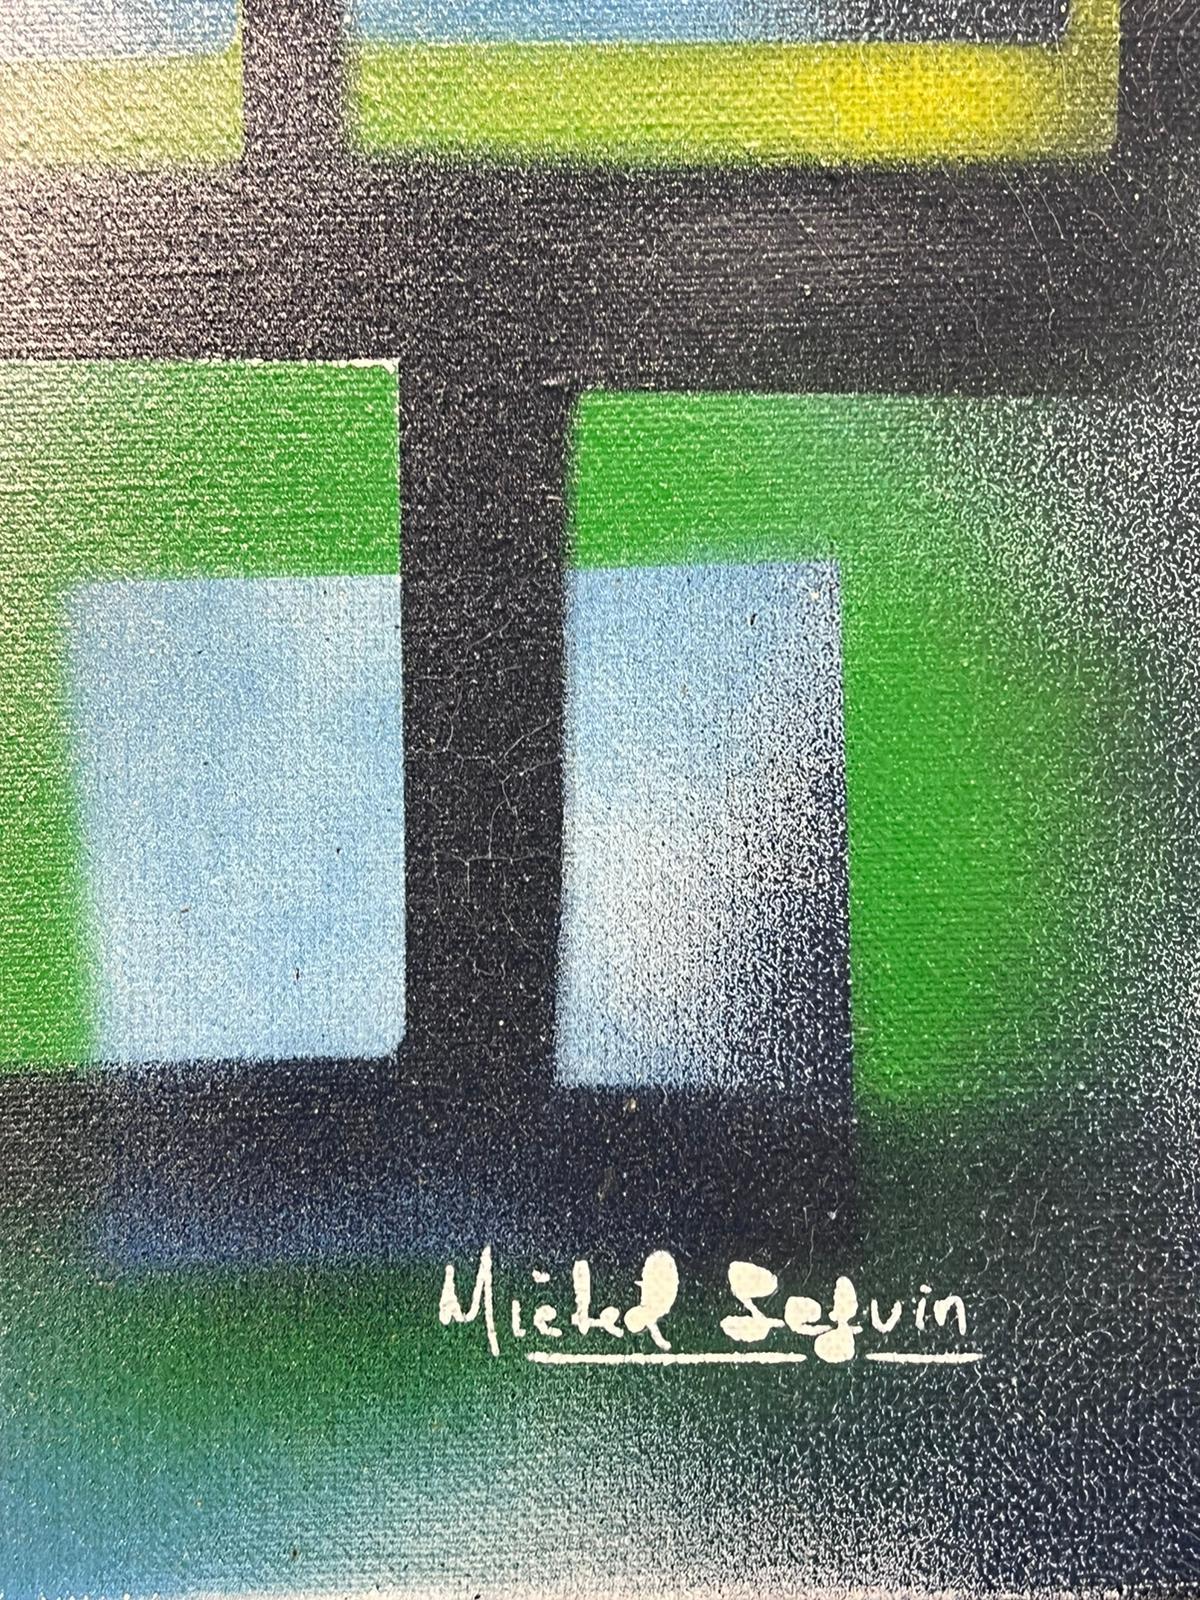 Abstract Composition
by Michel Seguin (French contemporary)
signed, paint on canvas, unframed
canvas: 25.5 x 21 inches
provenance: private collection, Paris
condition: very good and sound condition